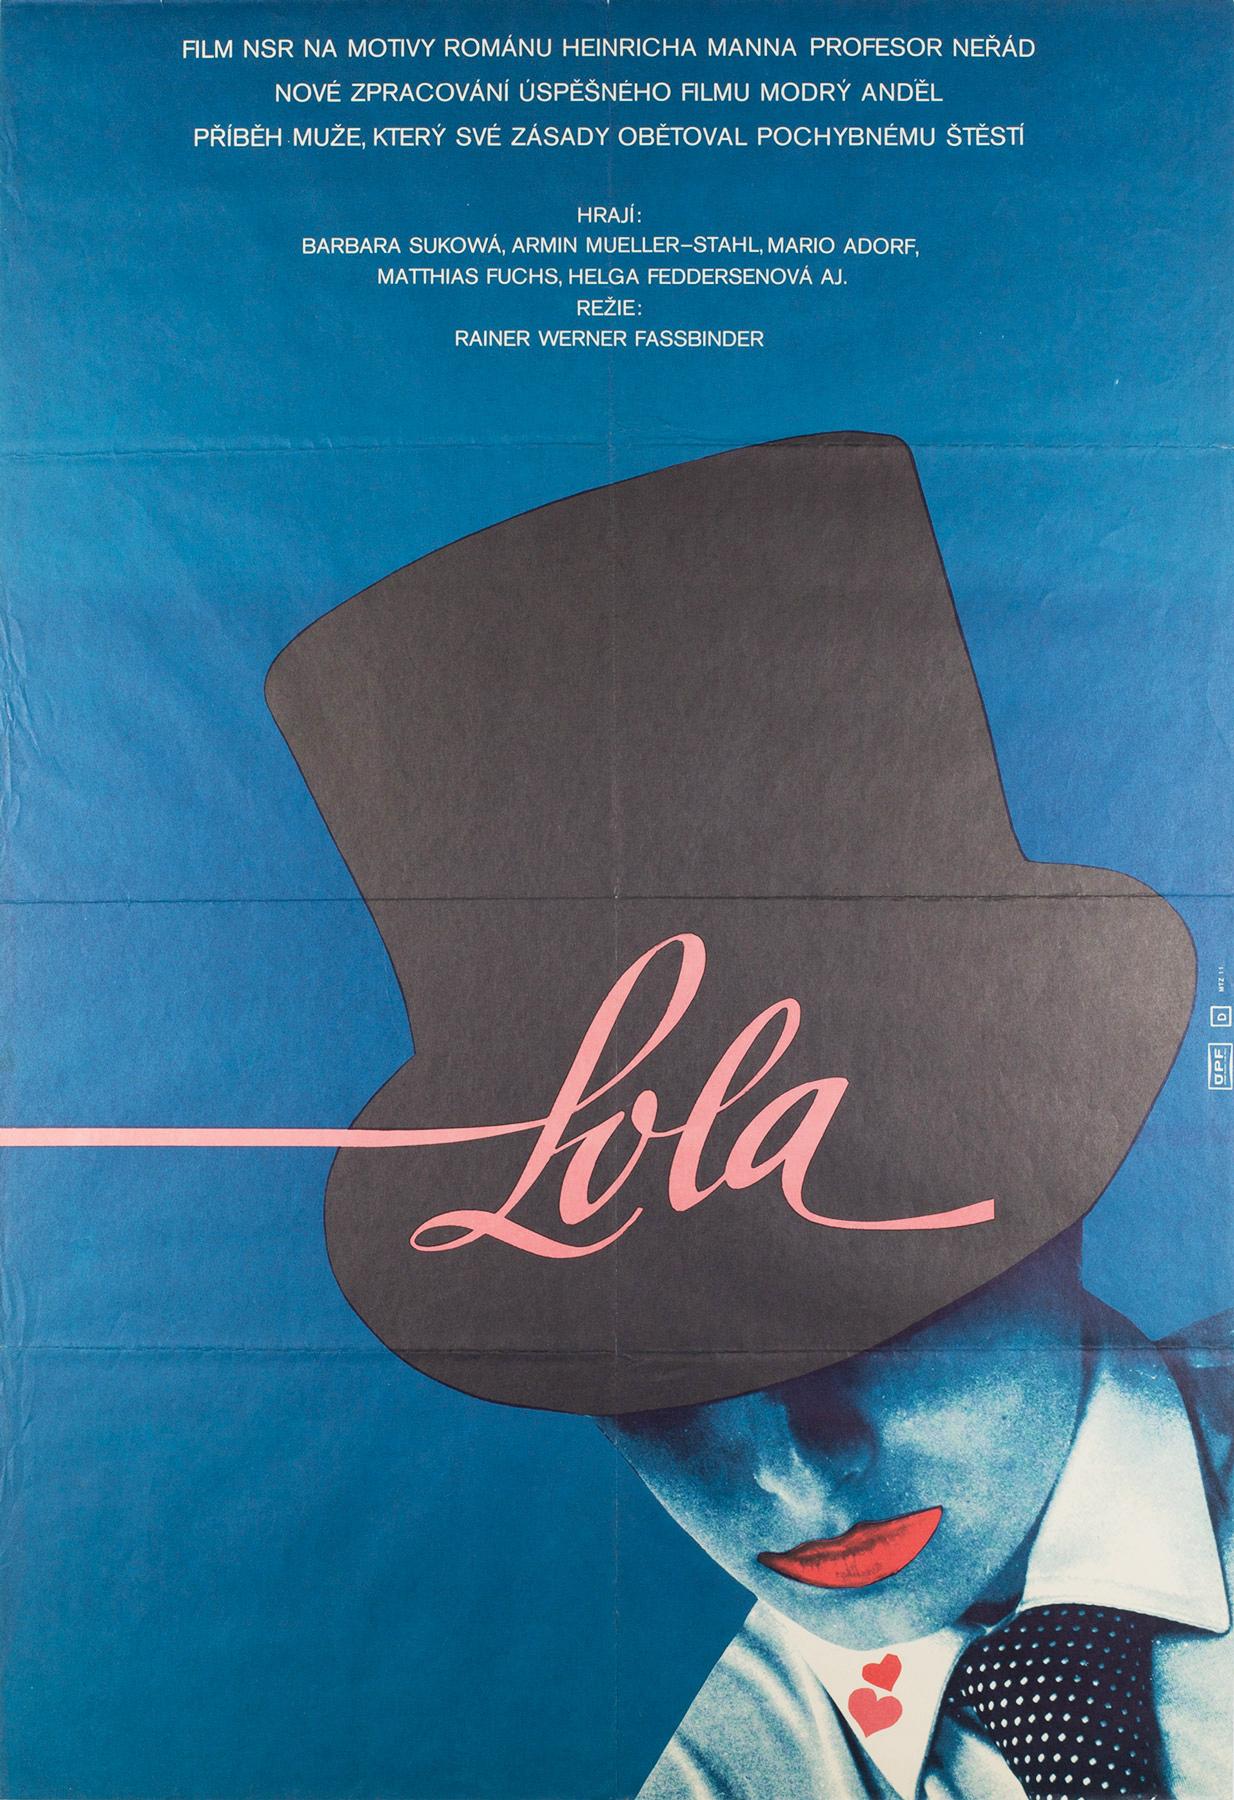 The sumptuous and brooding artwork on the original vintage Czech film poster for Fassbinder's Lola is striking, especially in this larger Czech size. 

Actual movie poster size 22 3/8 x 32 3/4 inches.